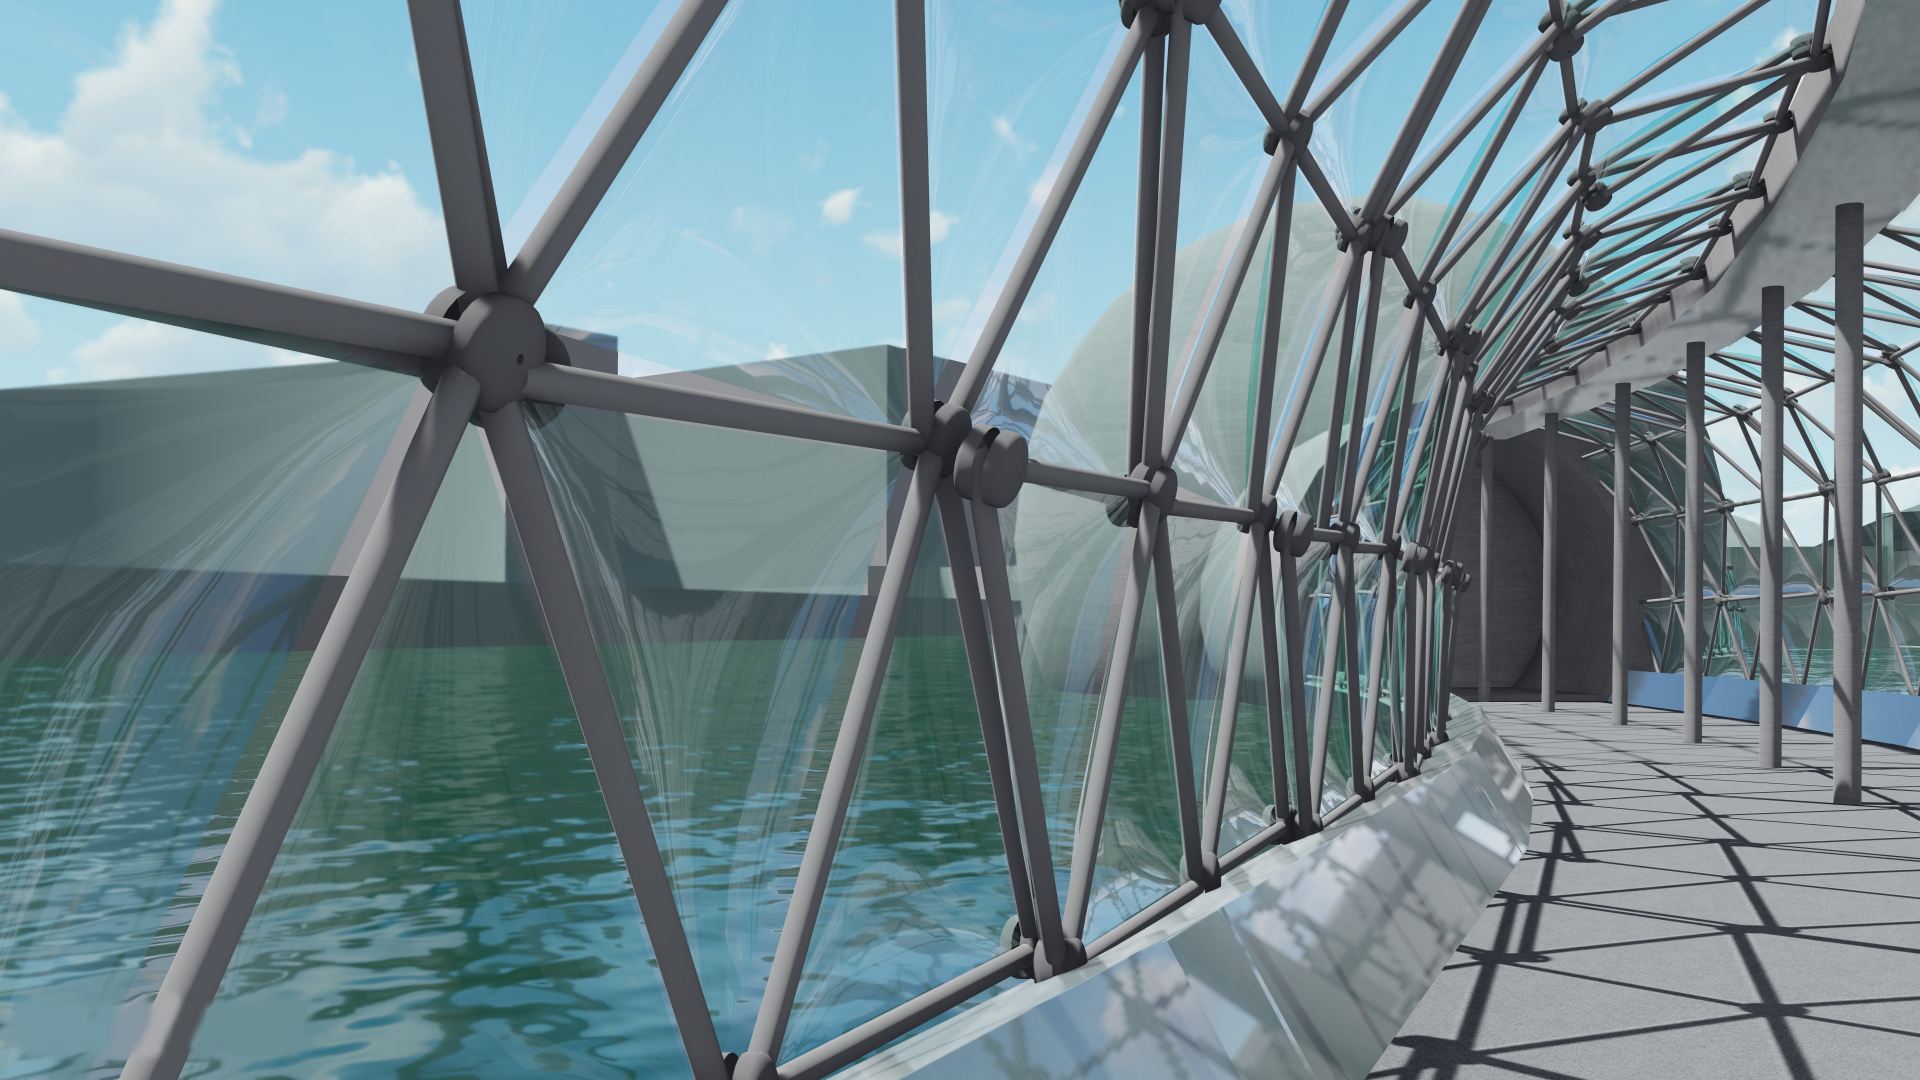 Internal visualisation of floating tunnels looking onto surrounding context